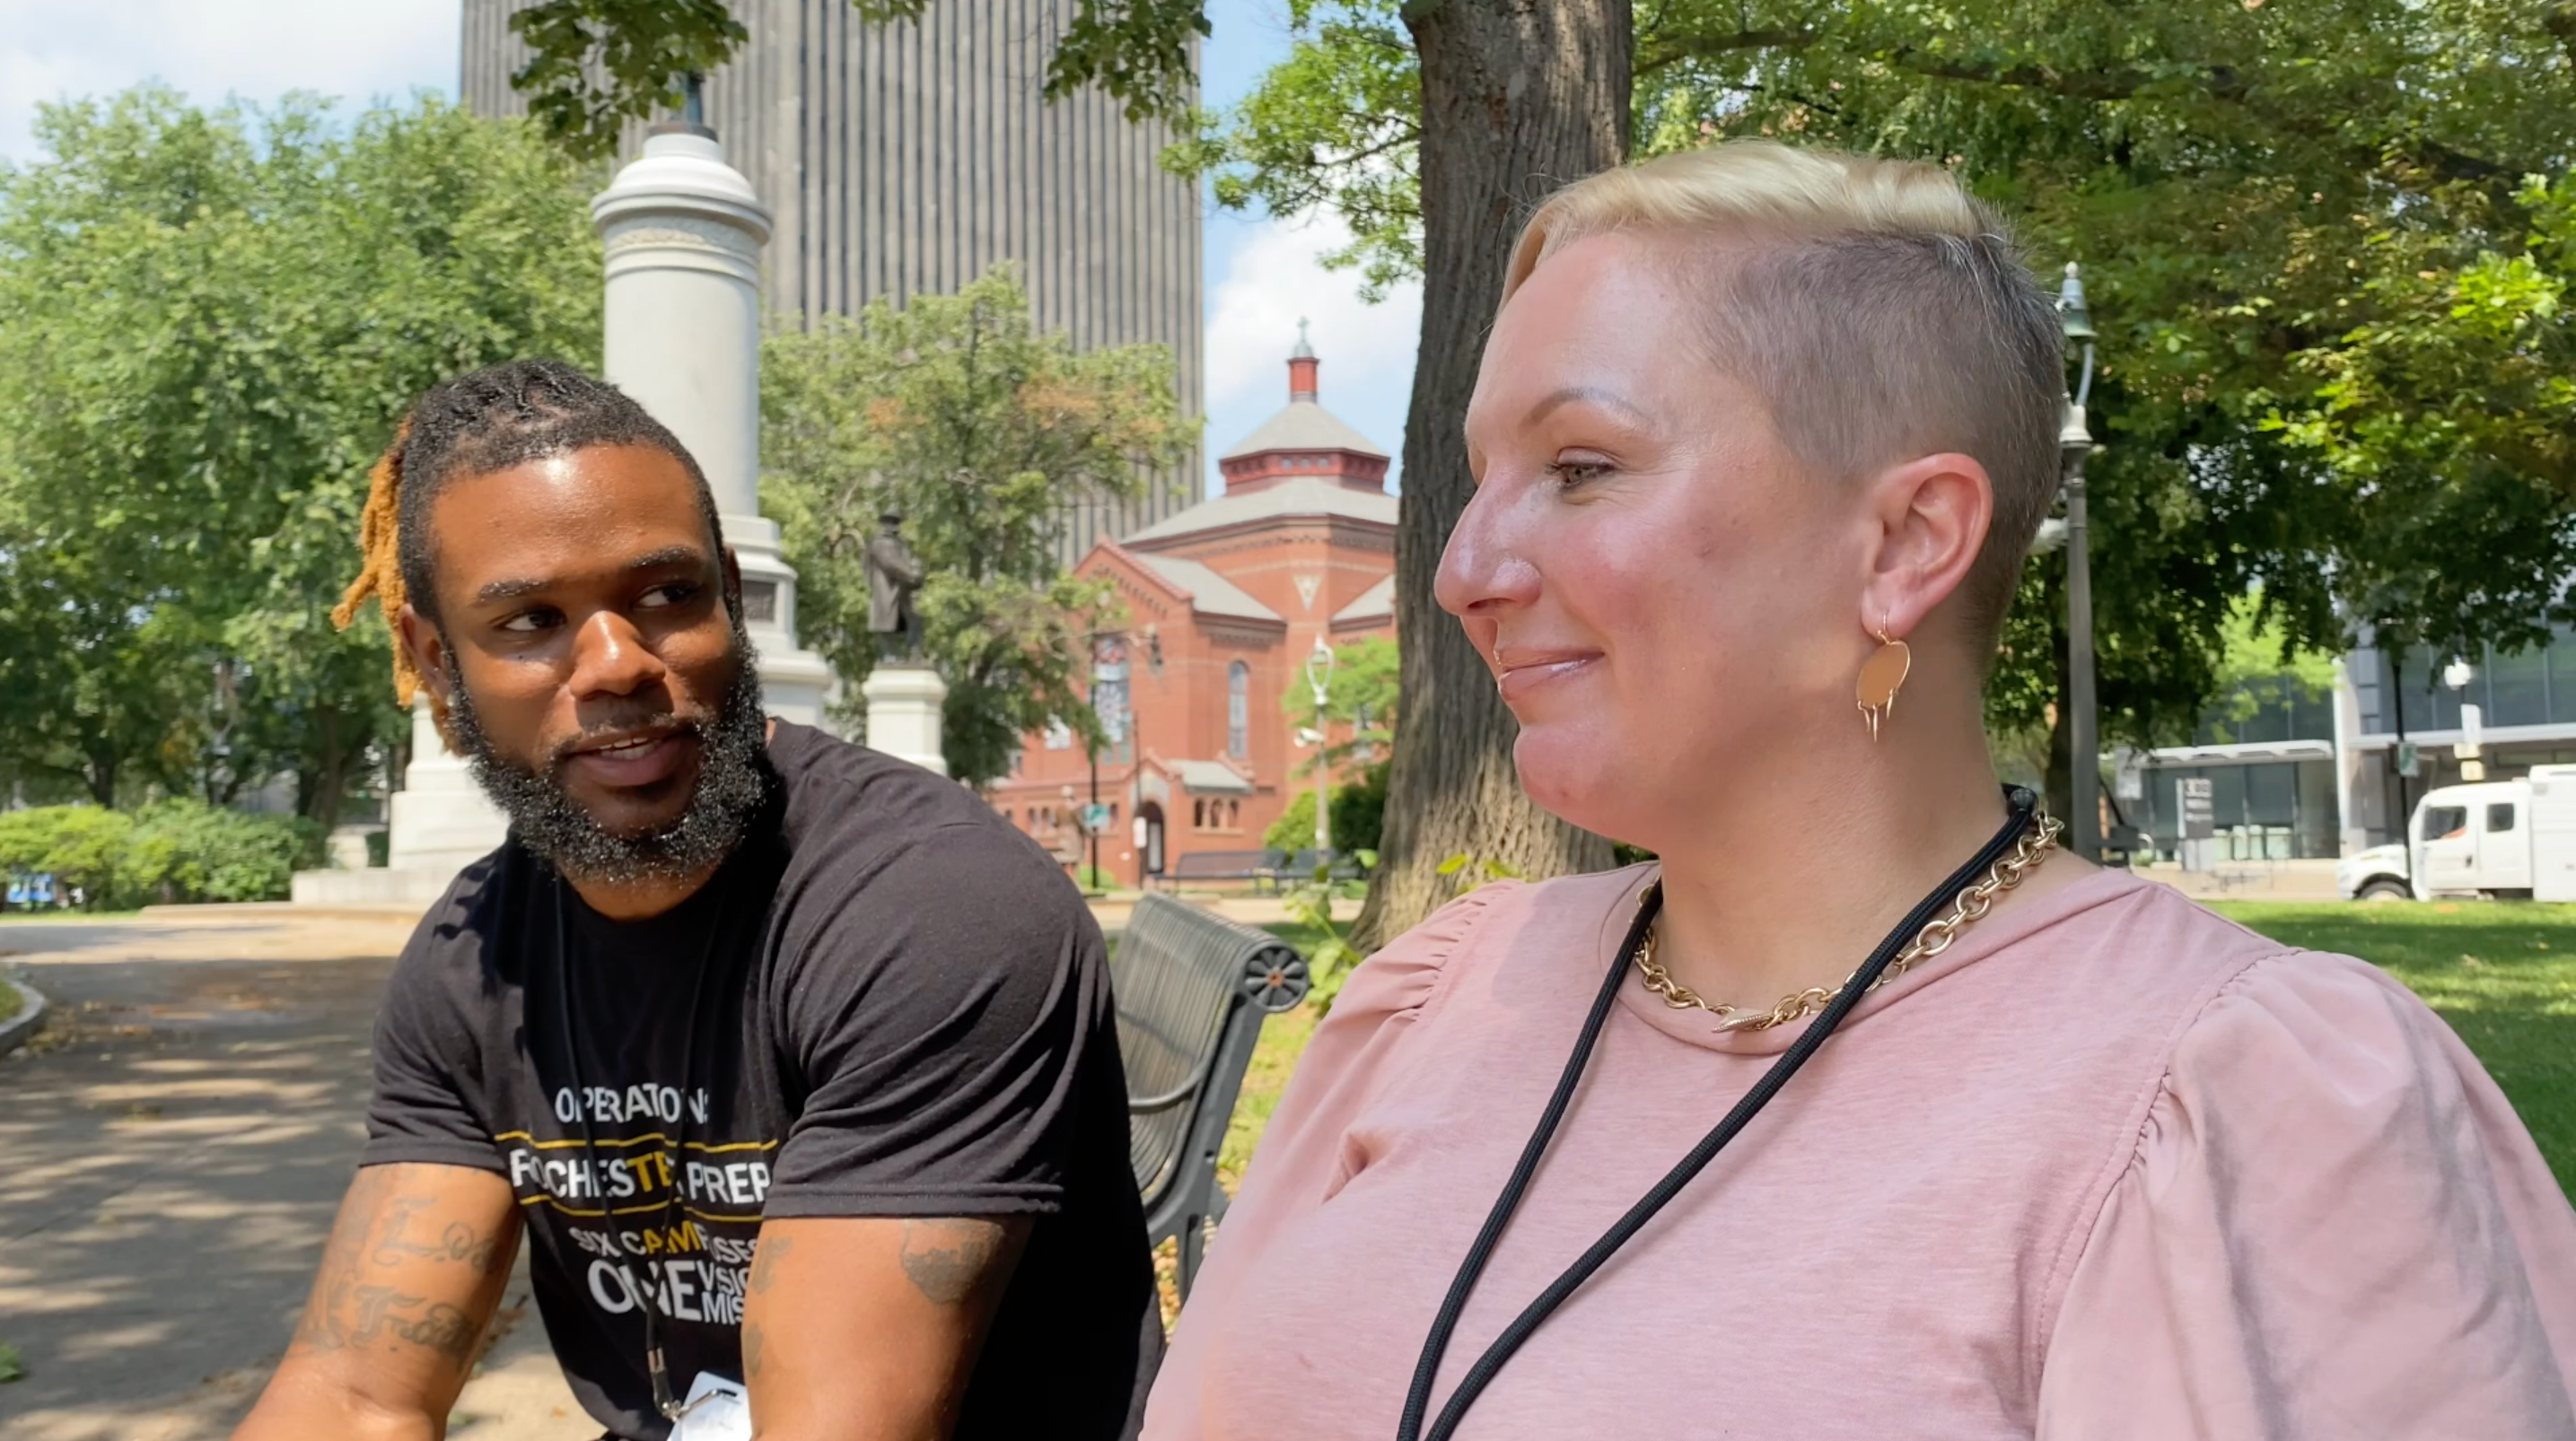 Dre’ Johnson and Renee Brean are social workers on Rochester’s Person in Crisis team.